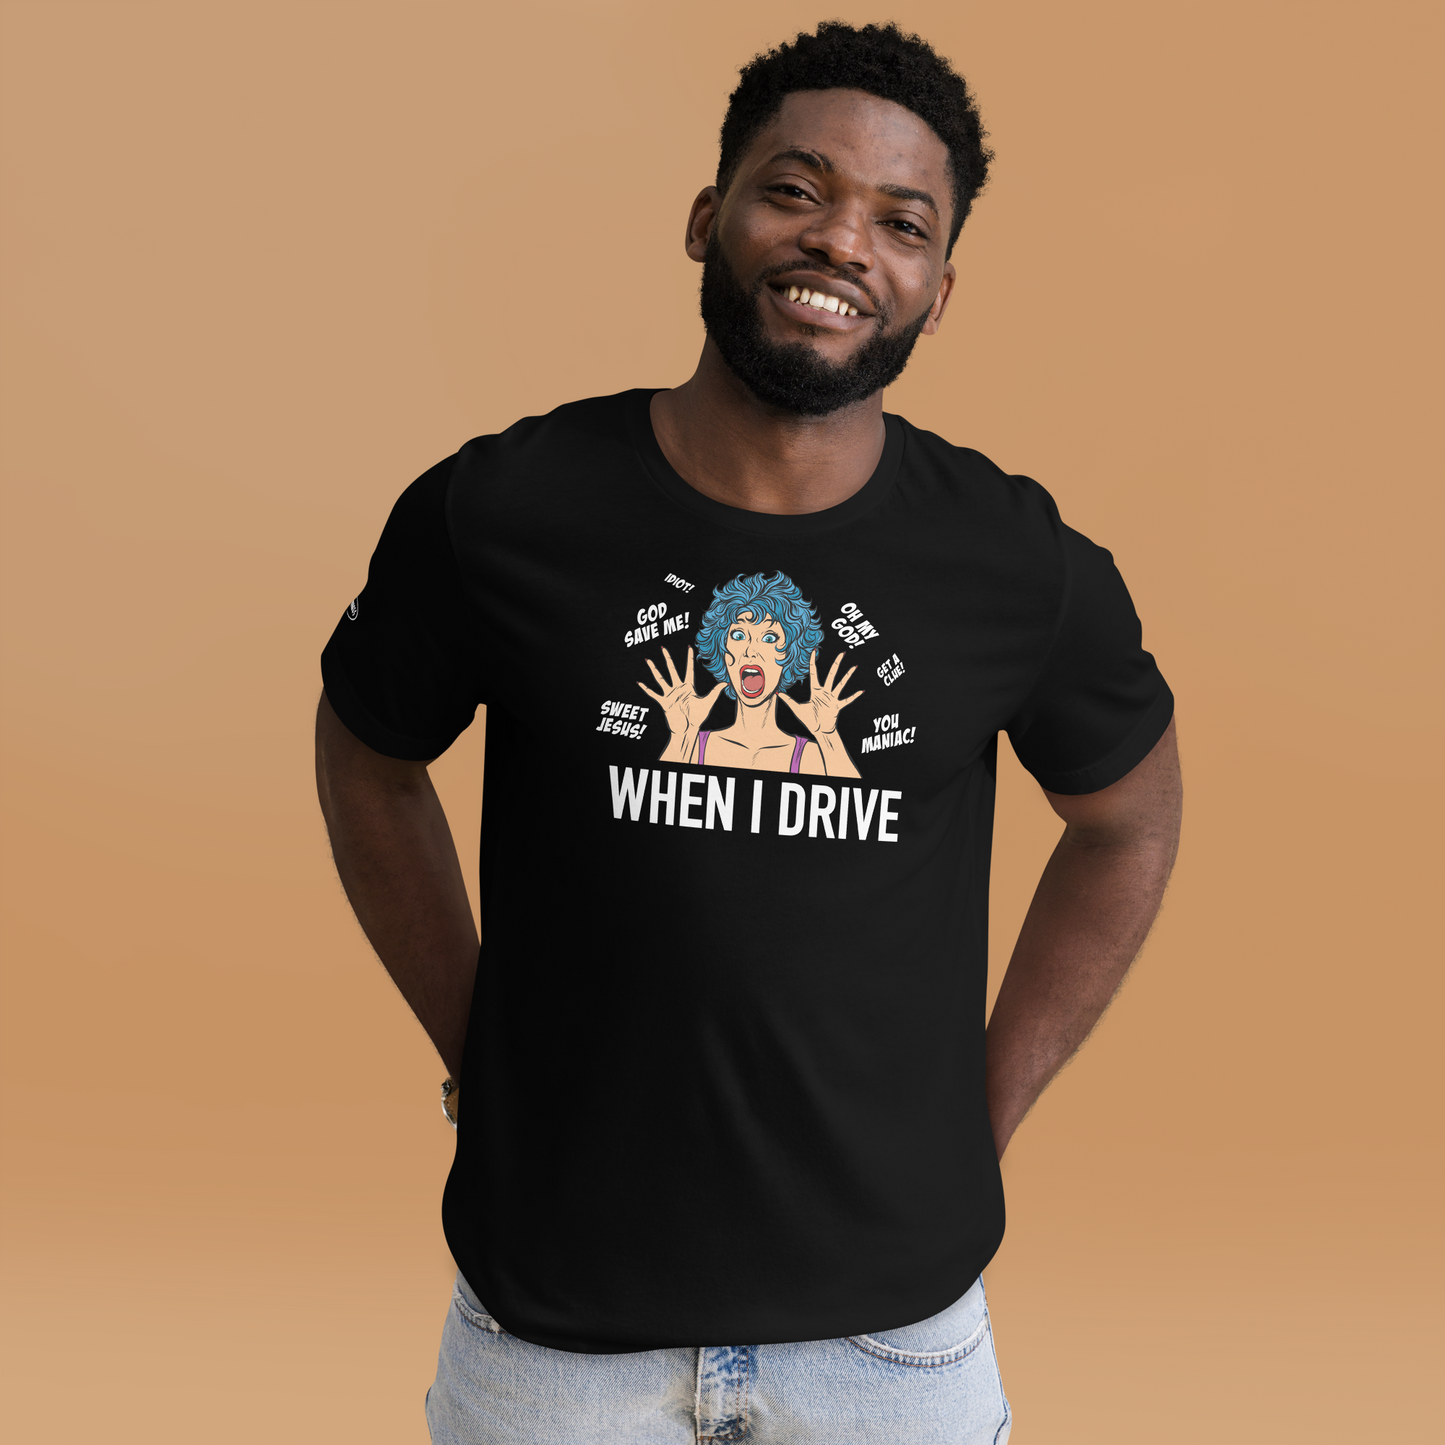 When I Drive - Funny T-Shirt